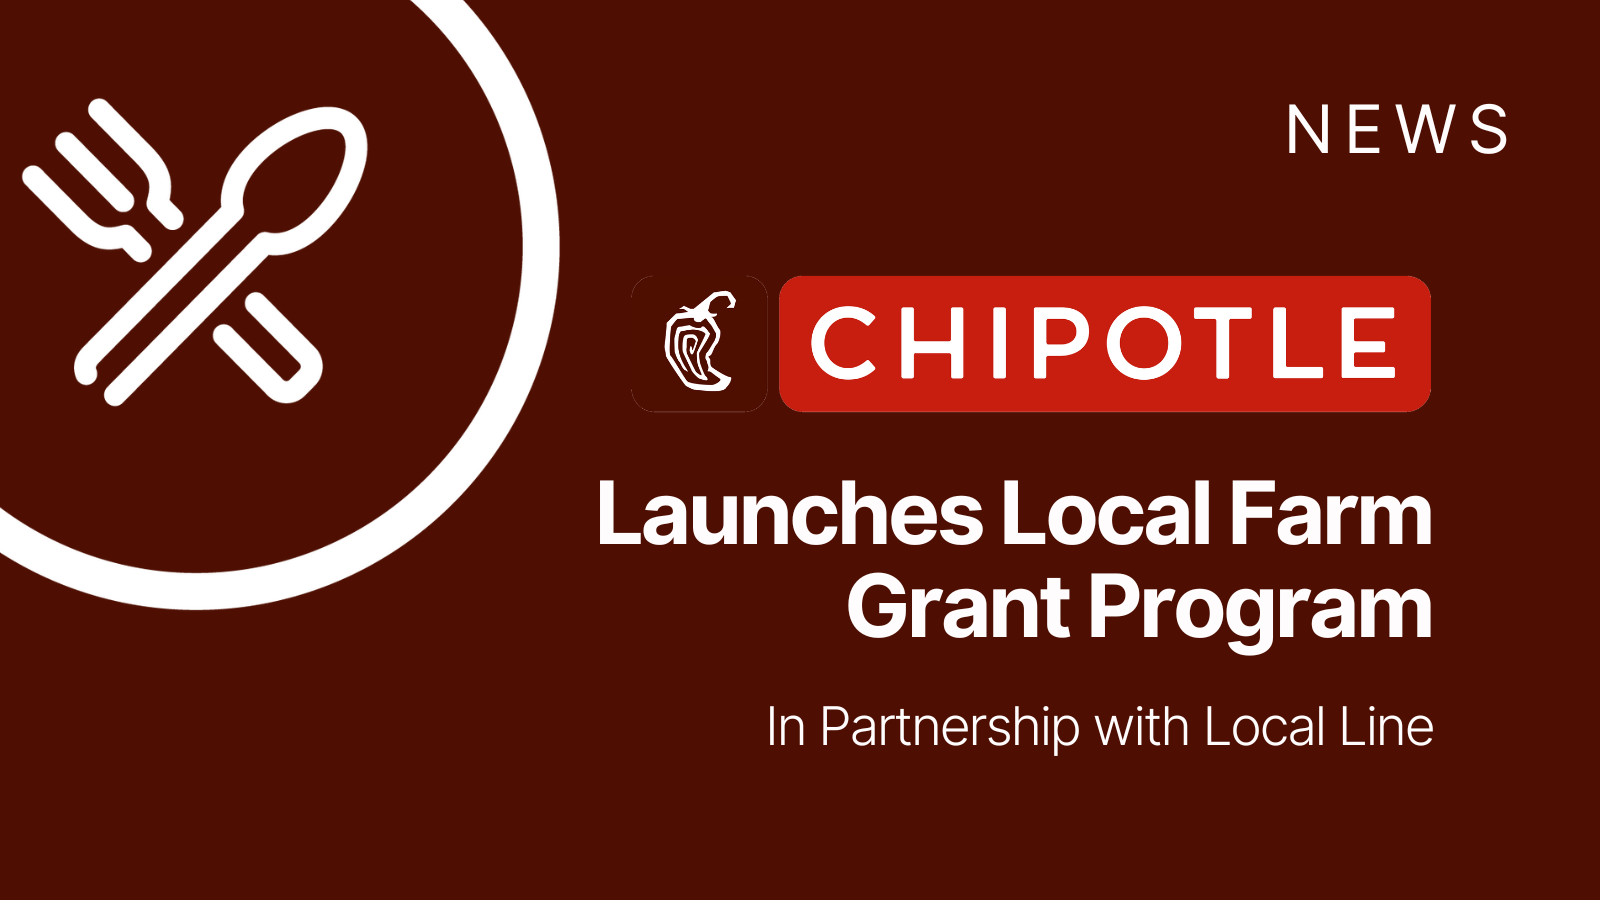 Chipotle launches 'Local Farm Grant Program' in partnership with Local Line